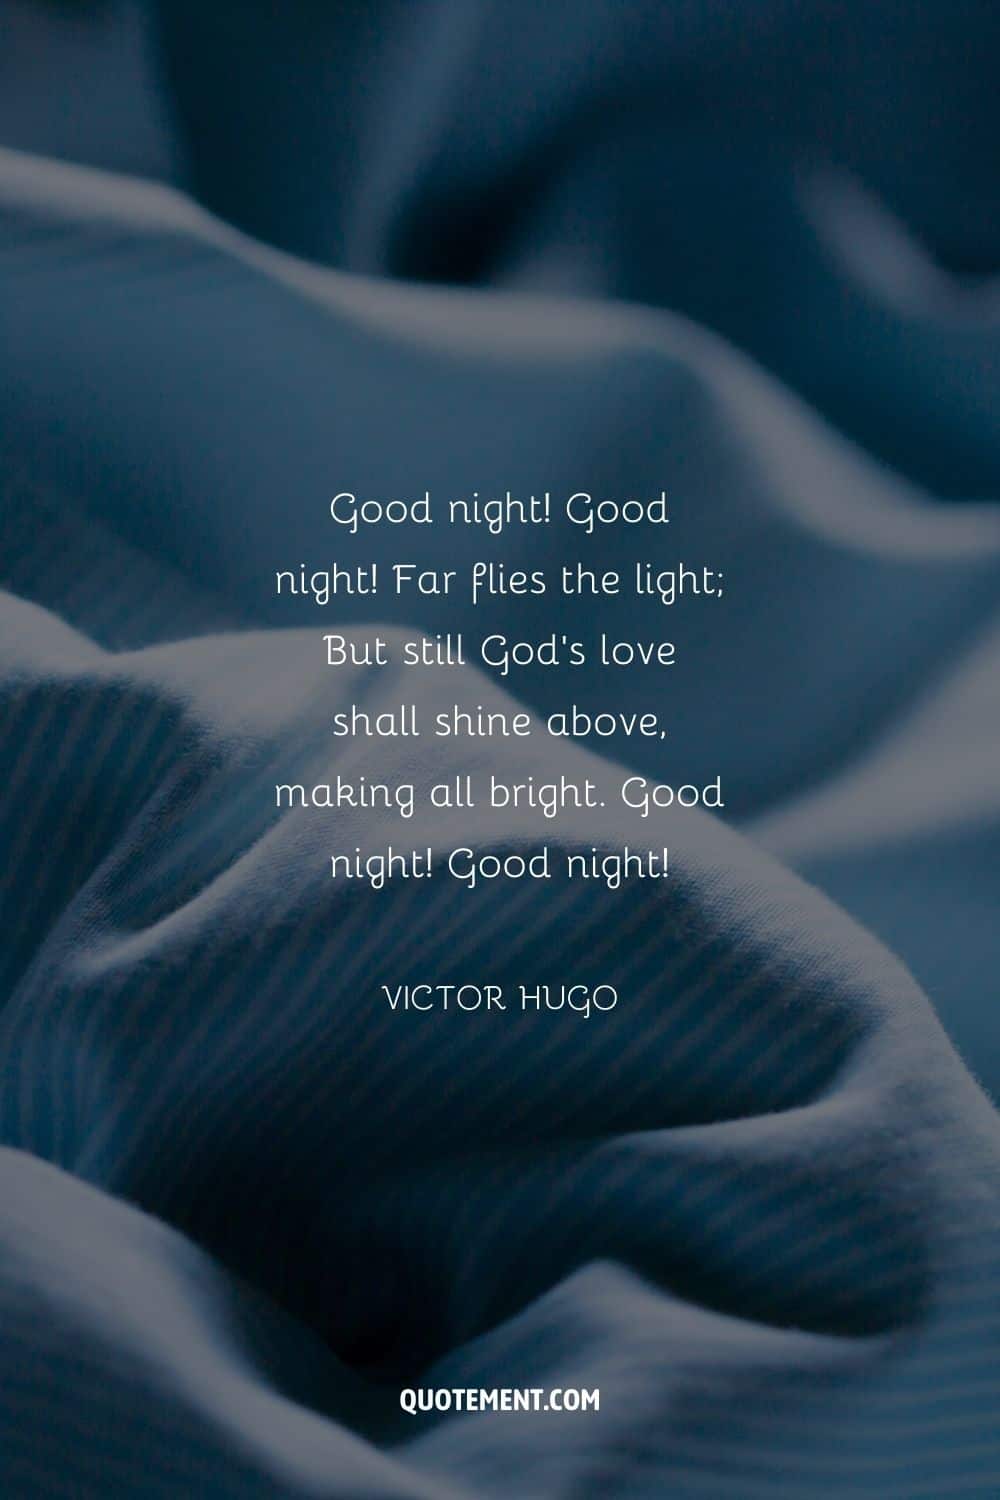 sheets image representing bedtime sleep peacefully quote